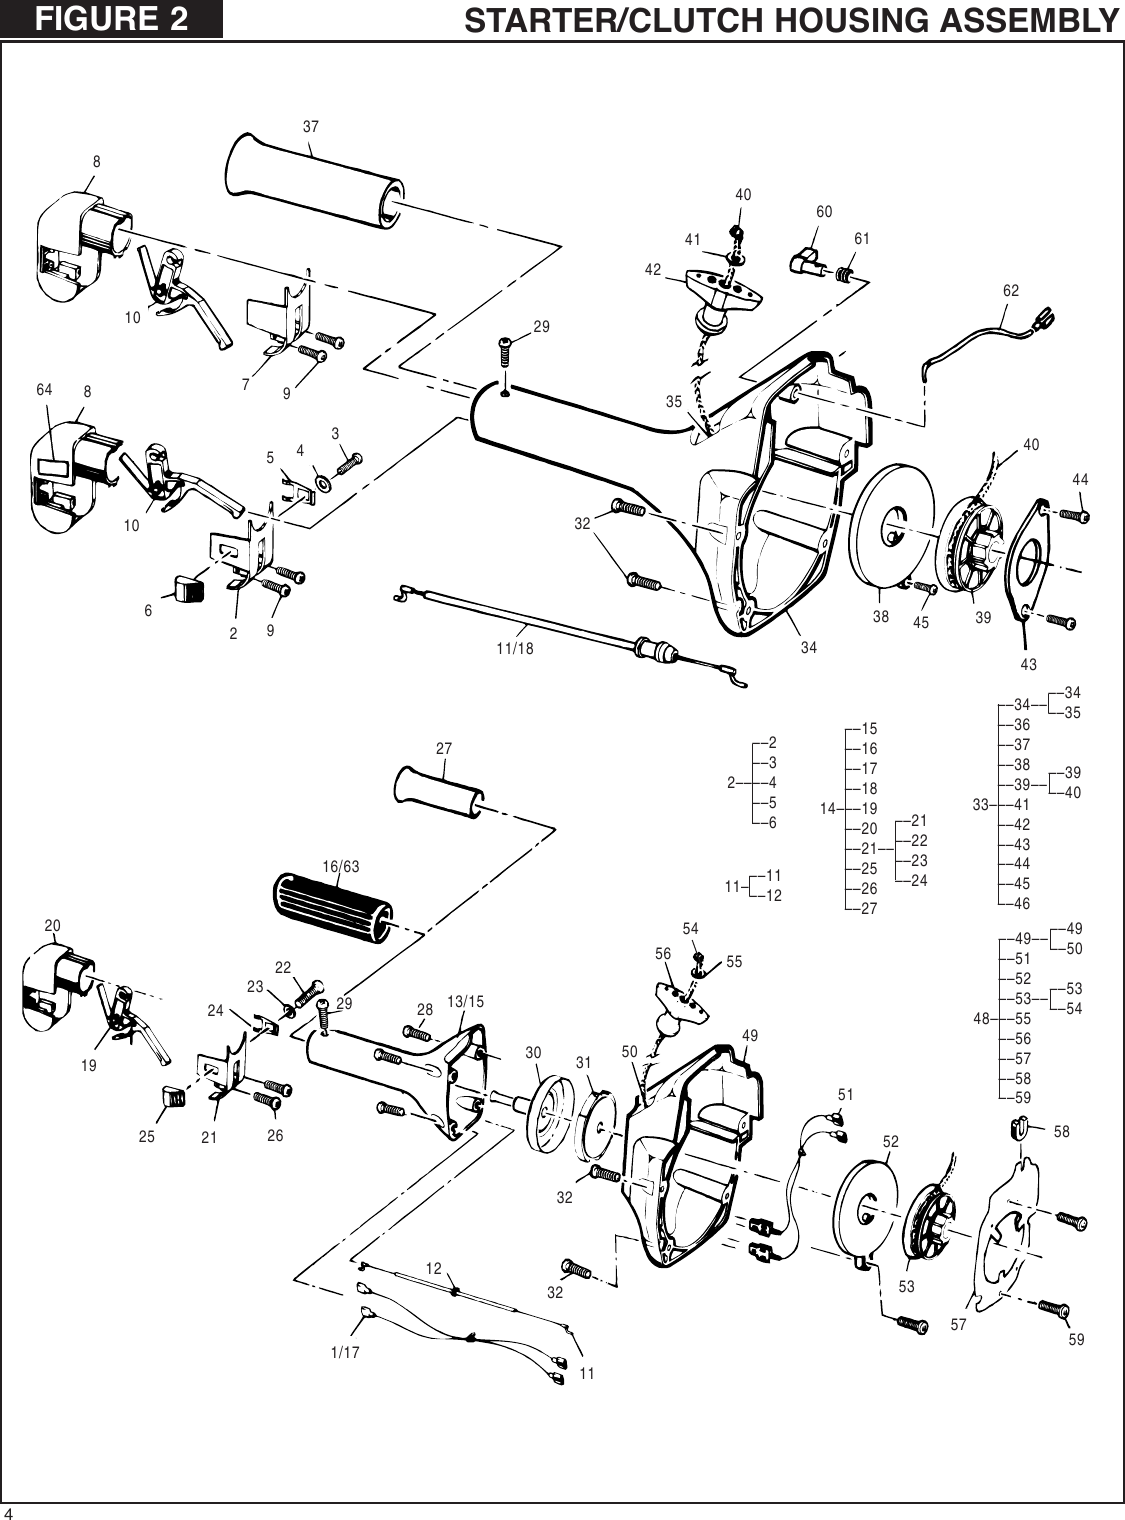 Page 4 of 8 - Mcculloch Mcculloch-28Cc-Illustrated-Parts-Breakdown- ManualsLib - Makes It Easy To Find Manuals Online!  Mcculloch-28cc-illustrated-parts-breakdown